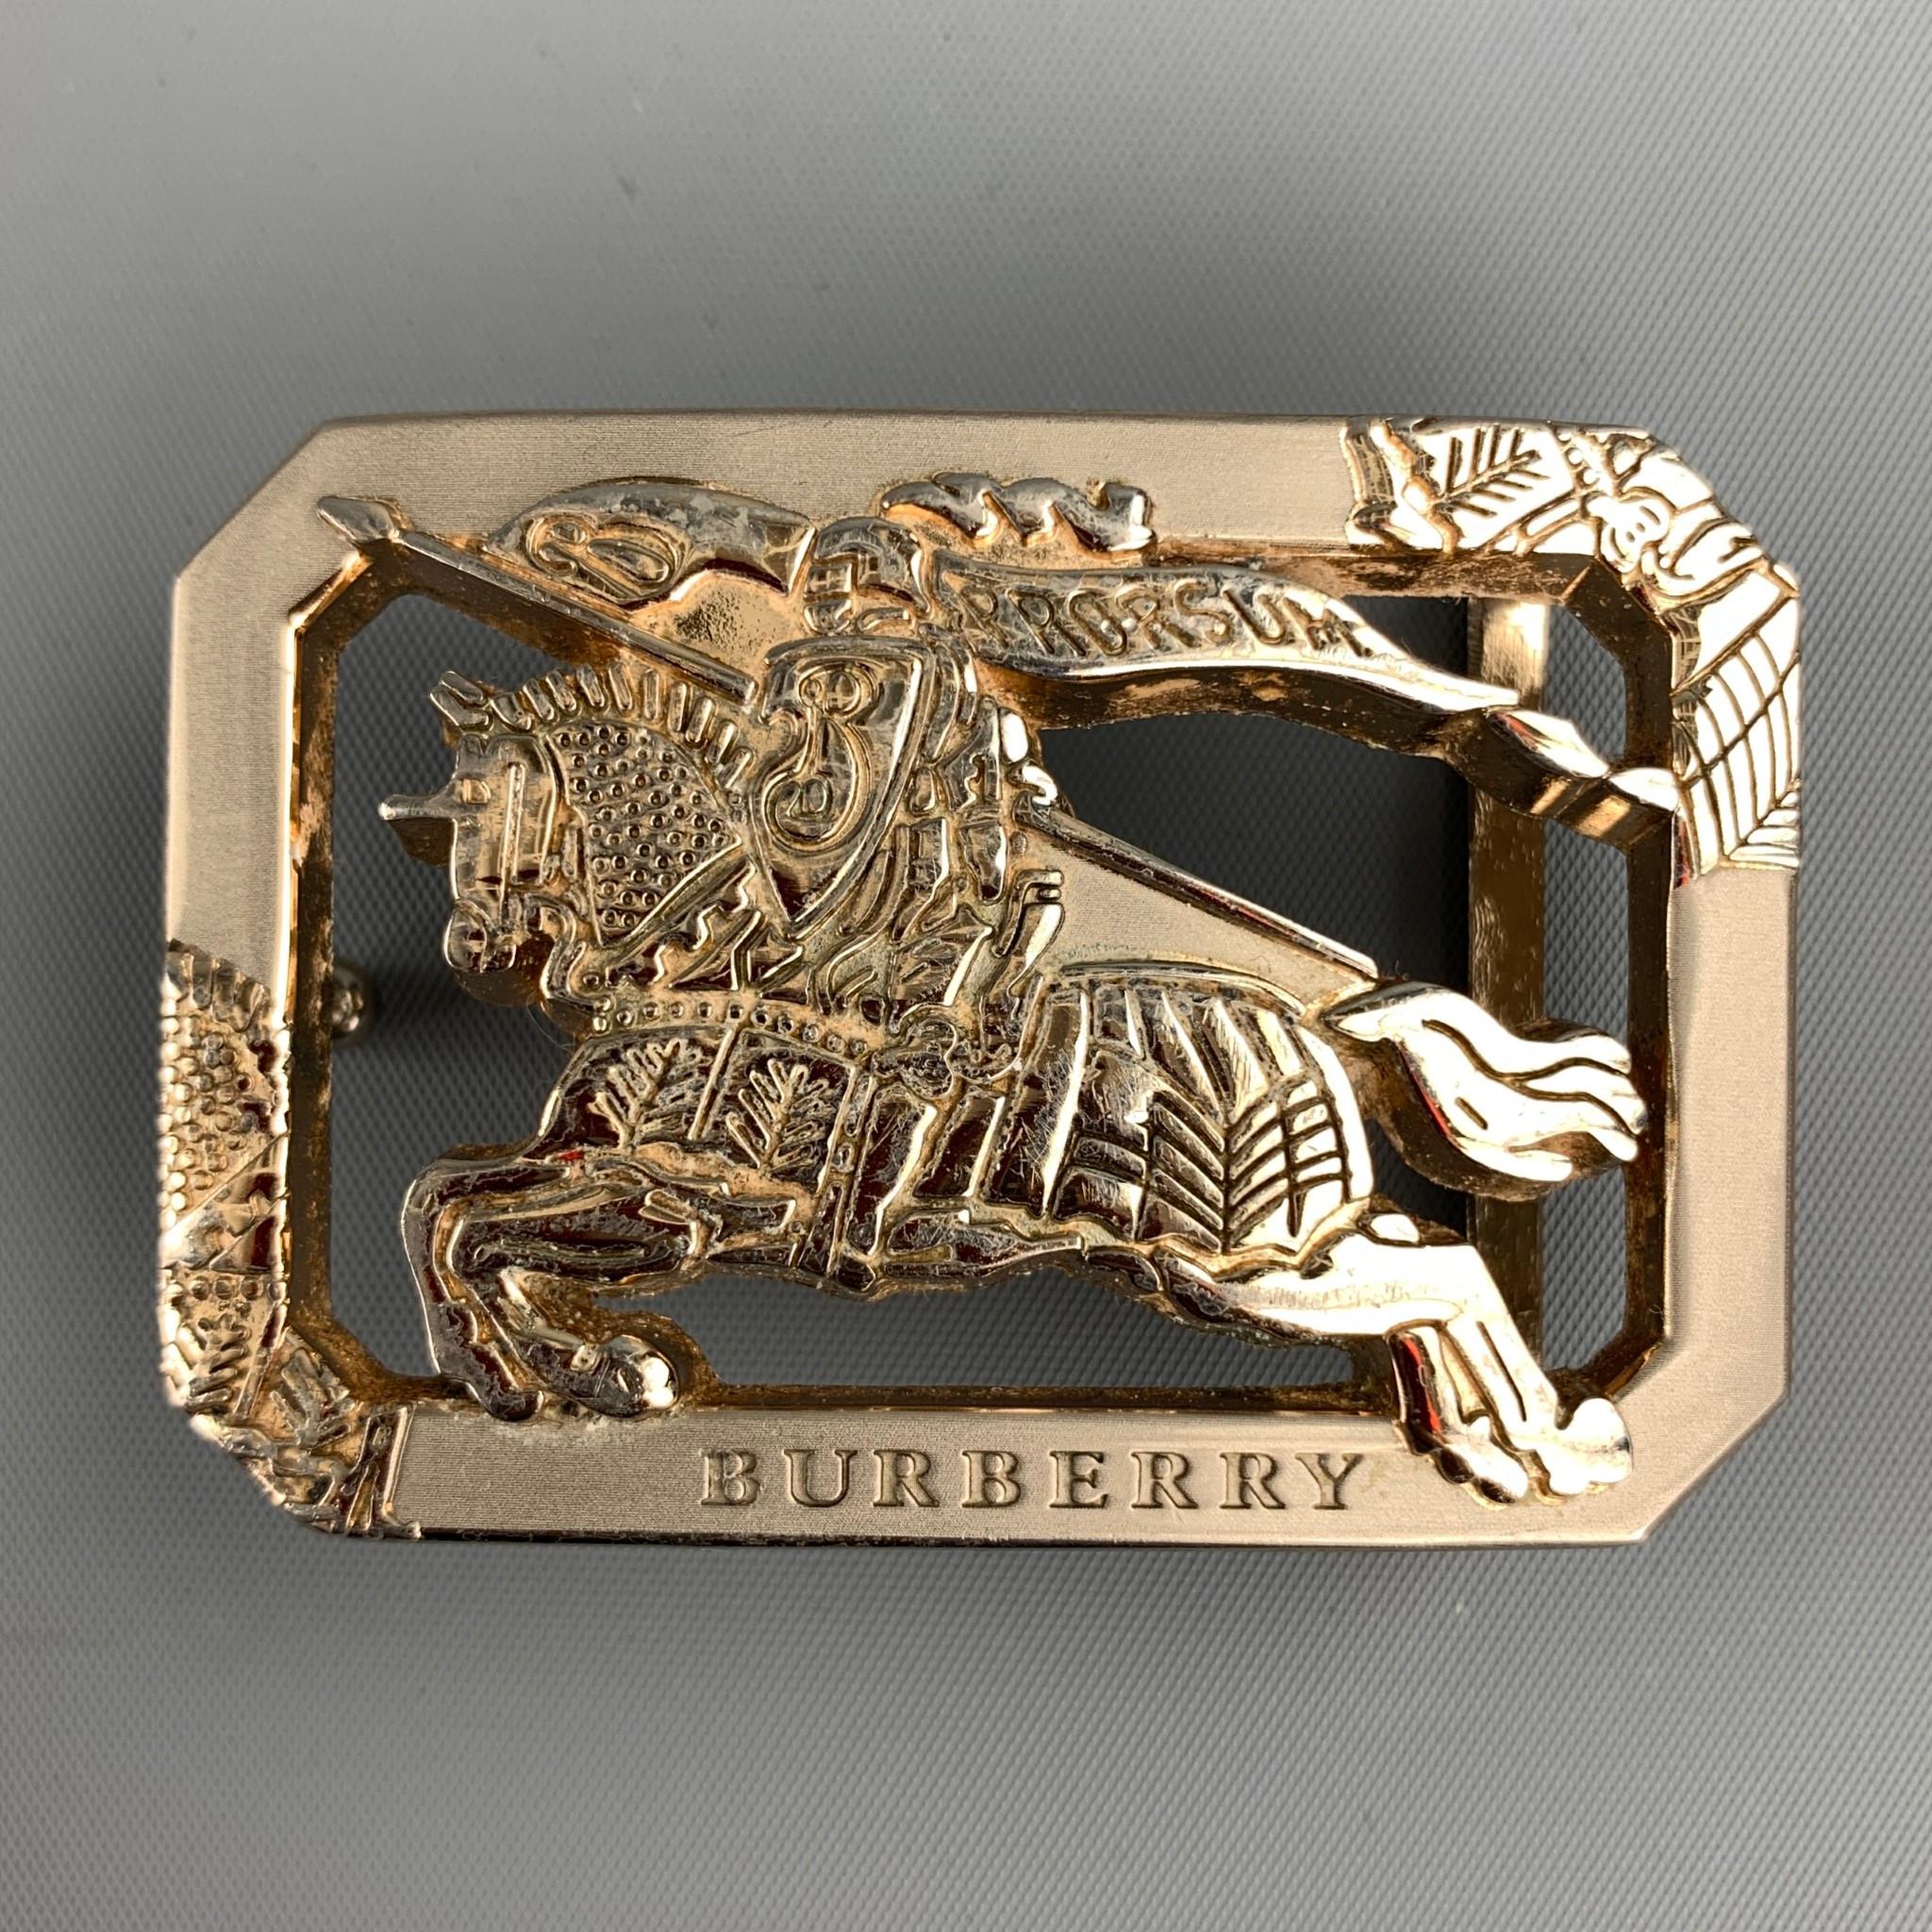 BURBERRY PRORSUM belt buckle comes in a silver tone metal featuring a 